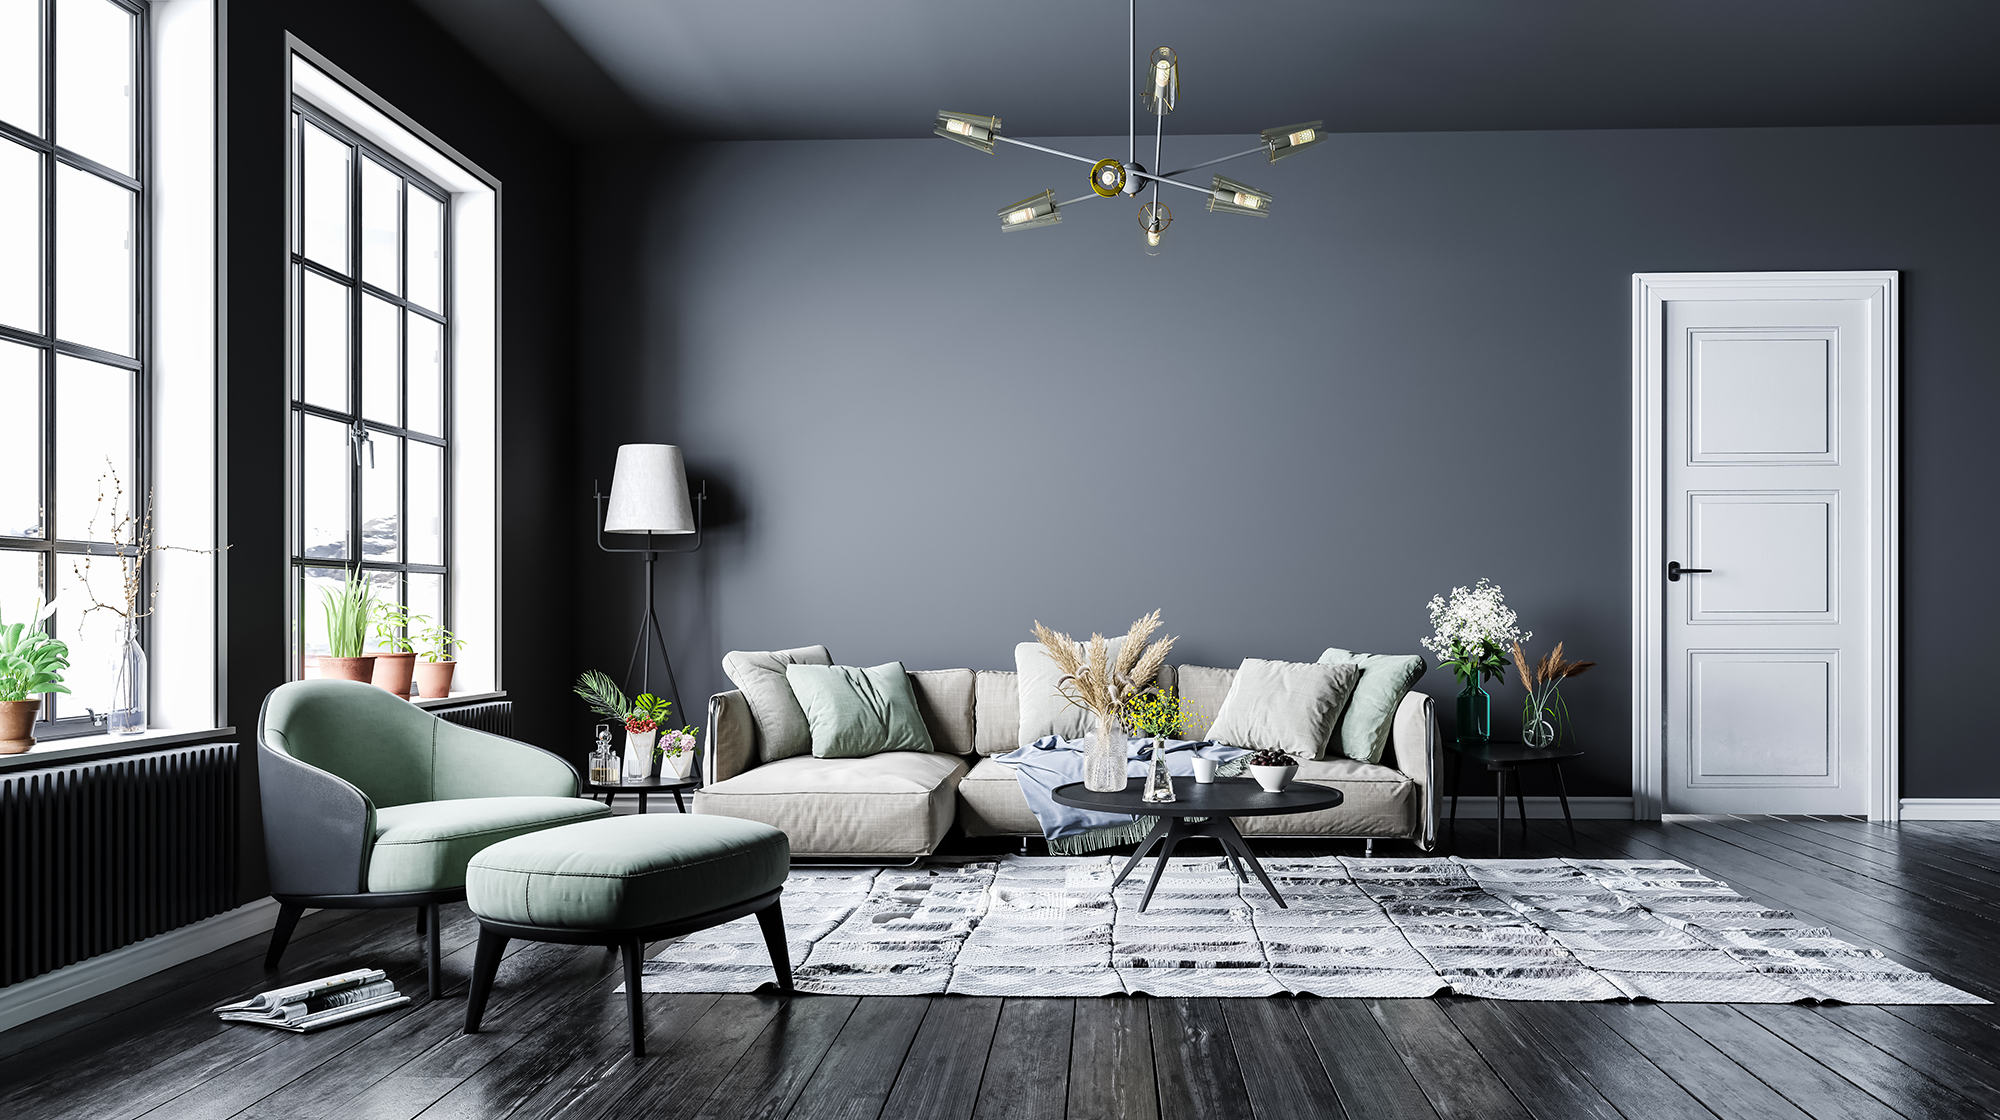 a living room with grey walls and wooden floors.